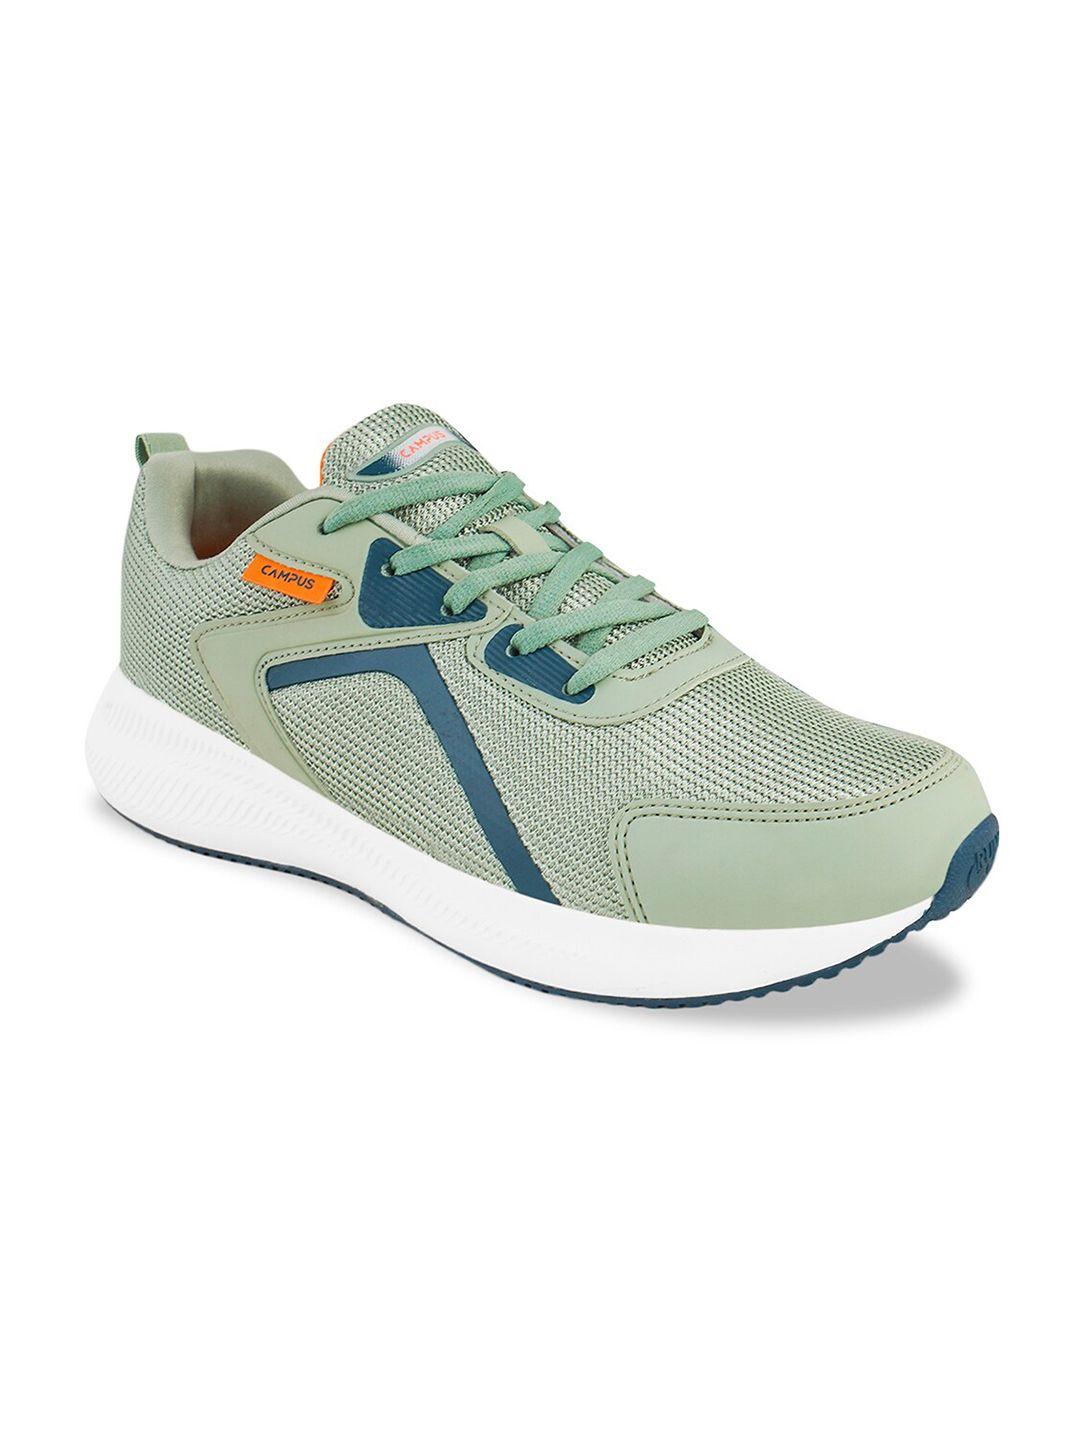 campus-men-olive-green-mesh-running-non-marking-shoes